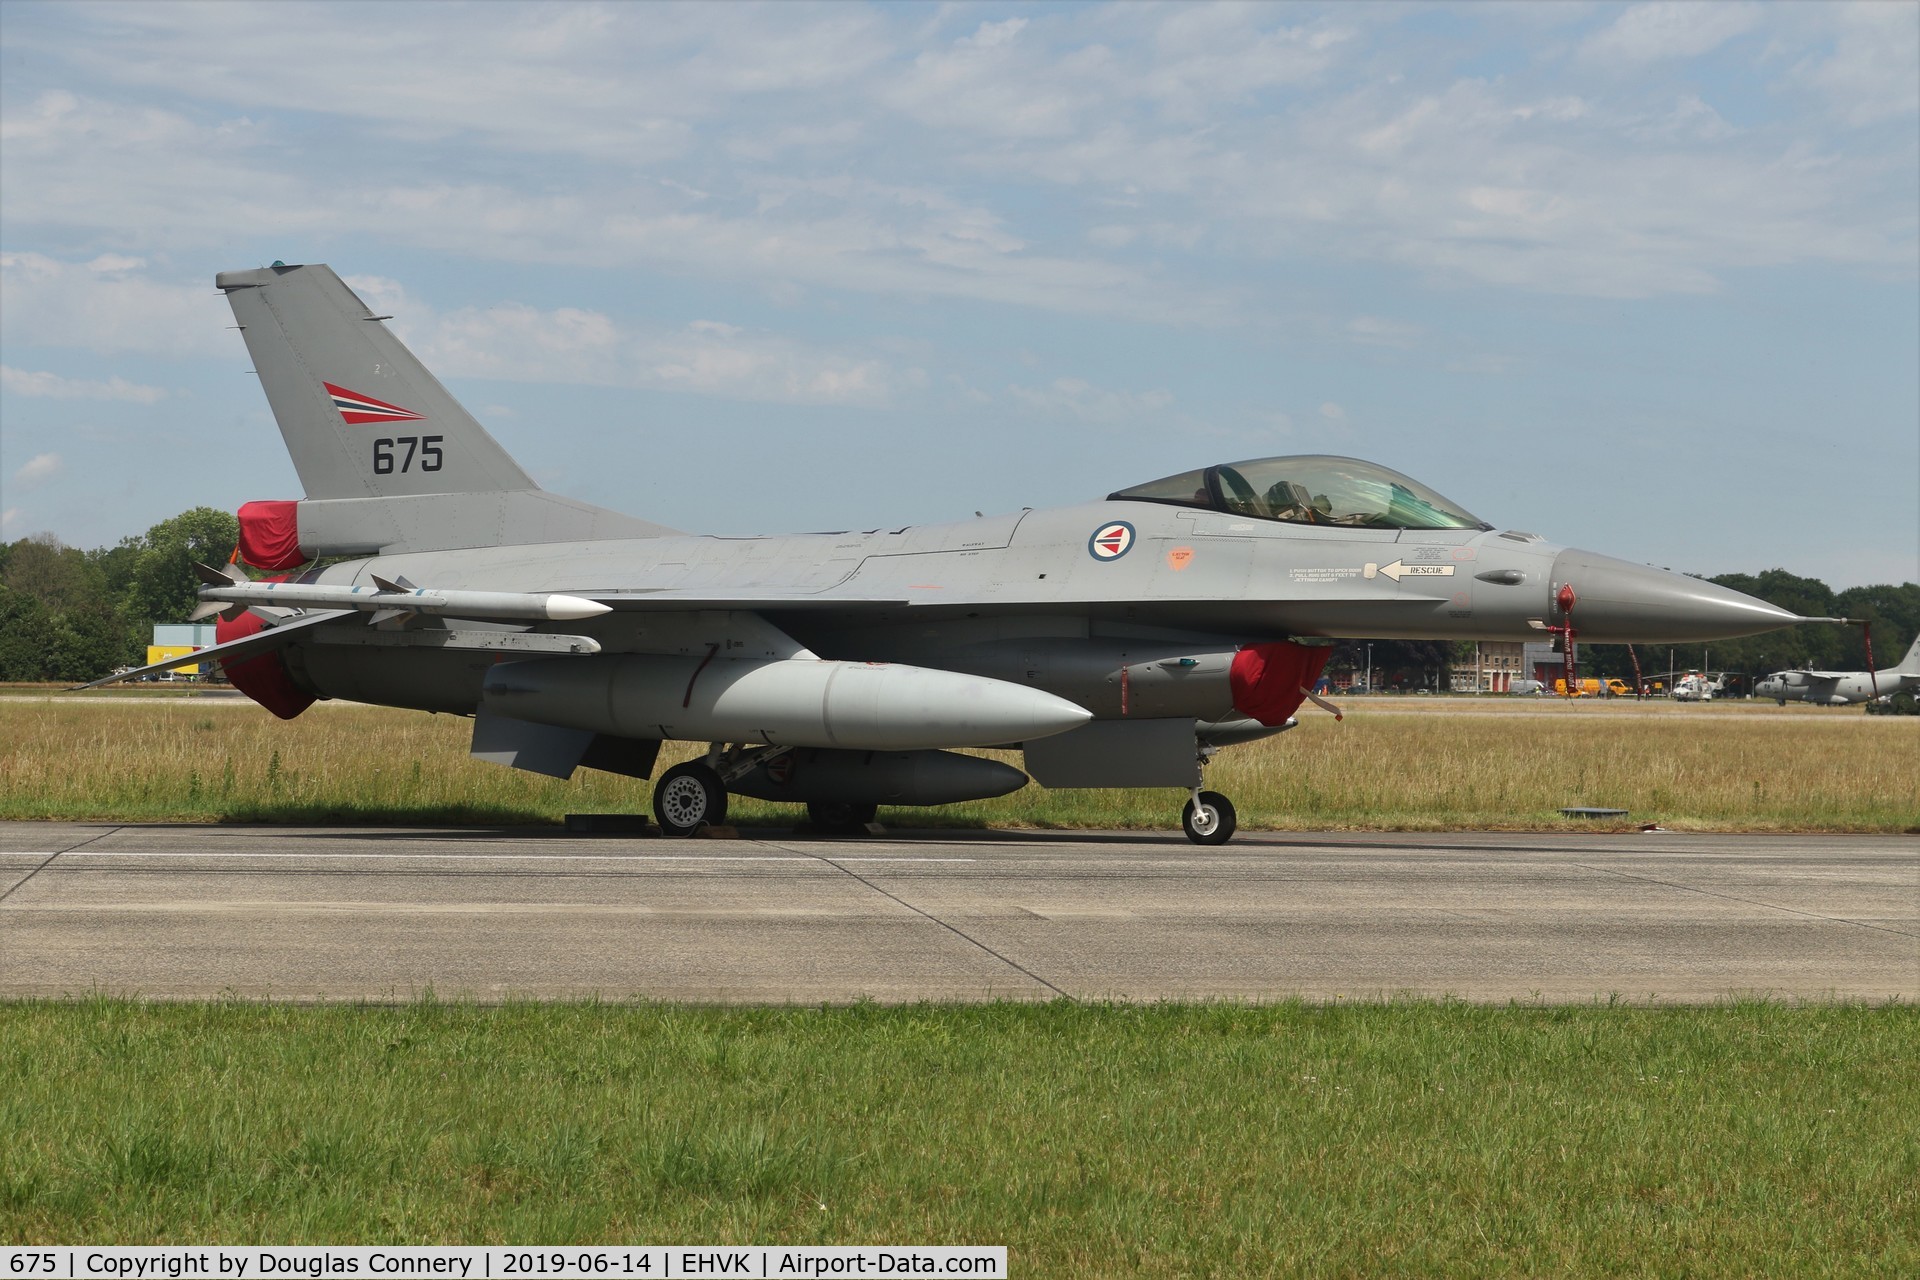 675, 1980 General Dynamics F-16AM Fighting Falcon C/N 6K-47, On static at Volkel AB for KLU open day